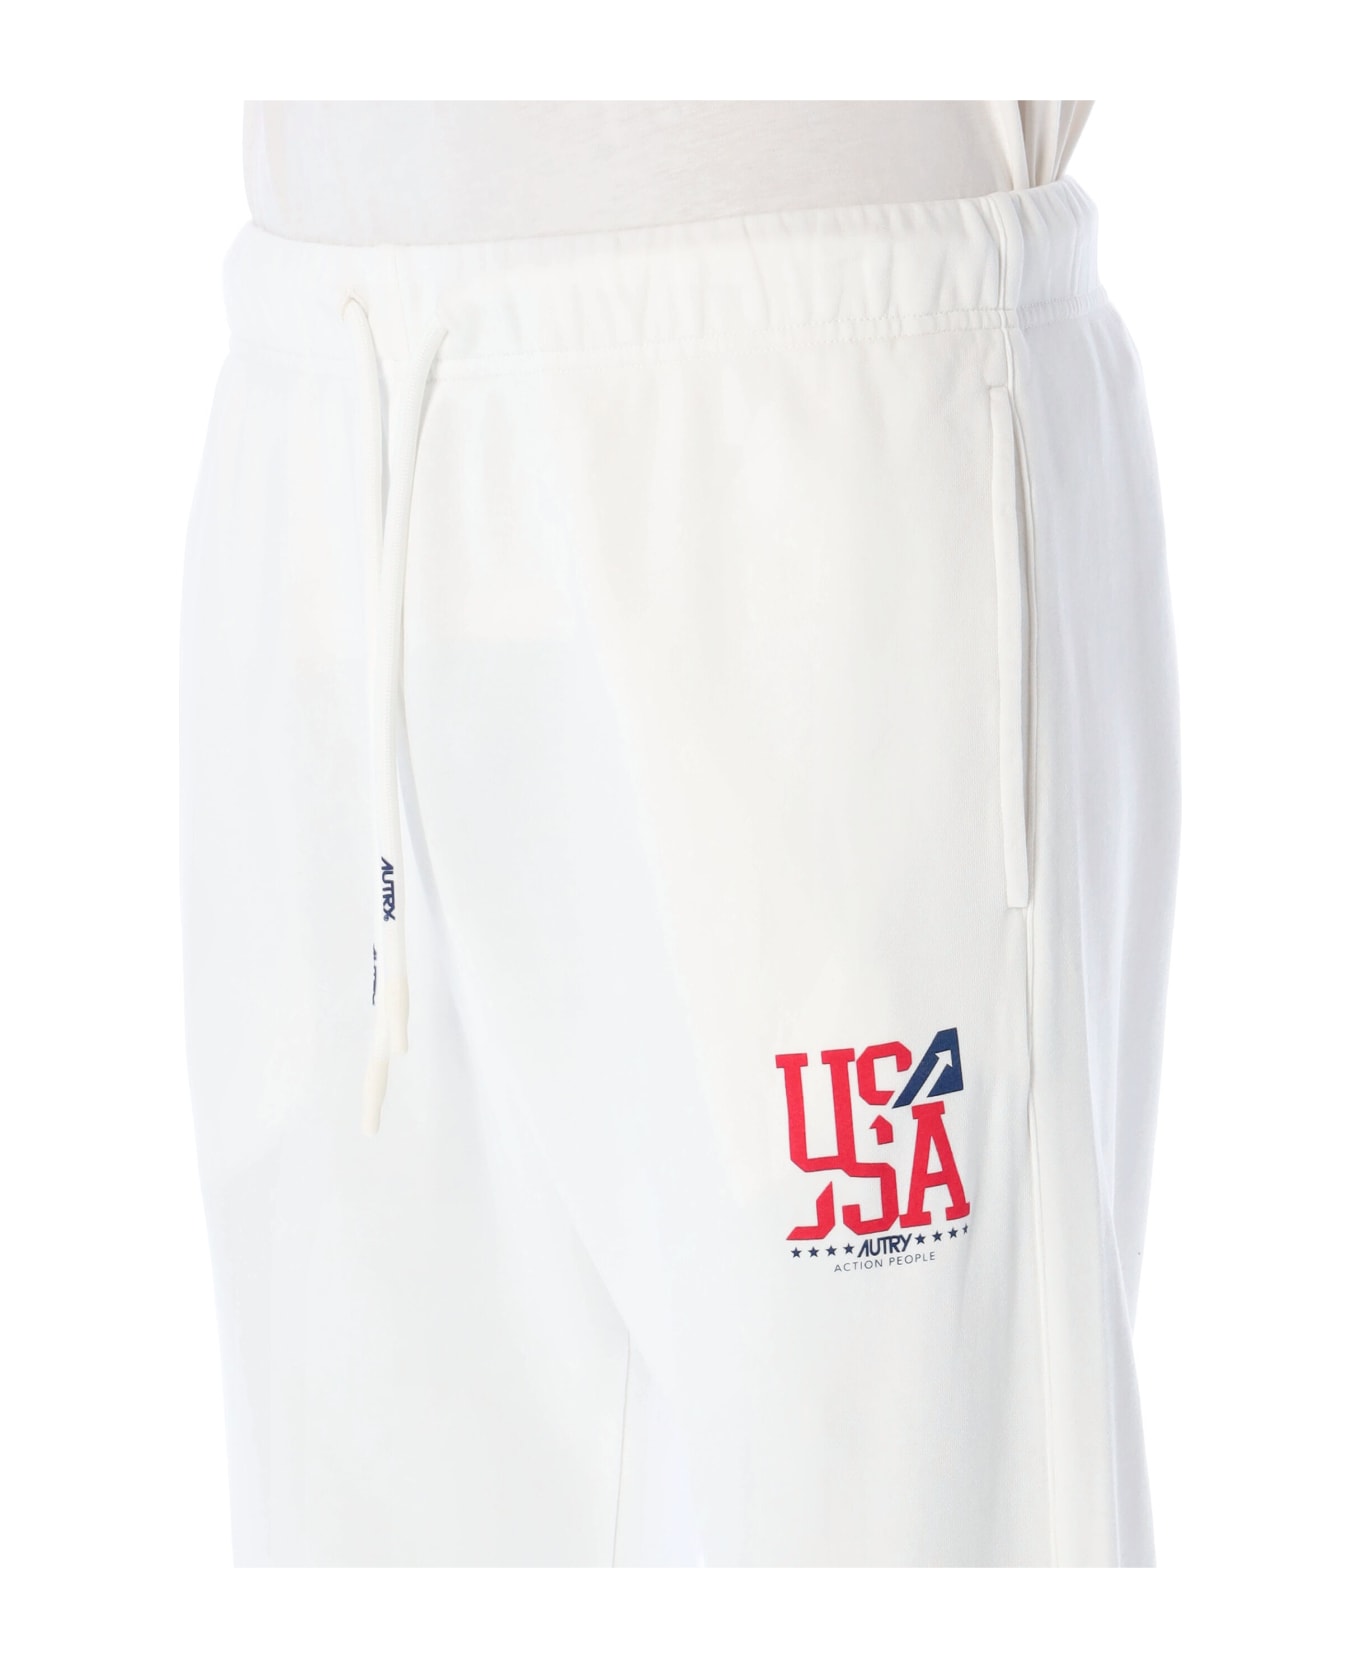 Autry Iconic Action Joggers - ACTION WHITE